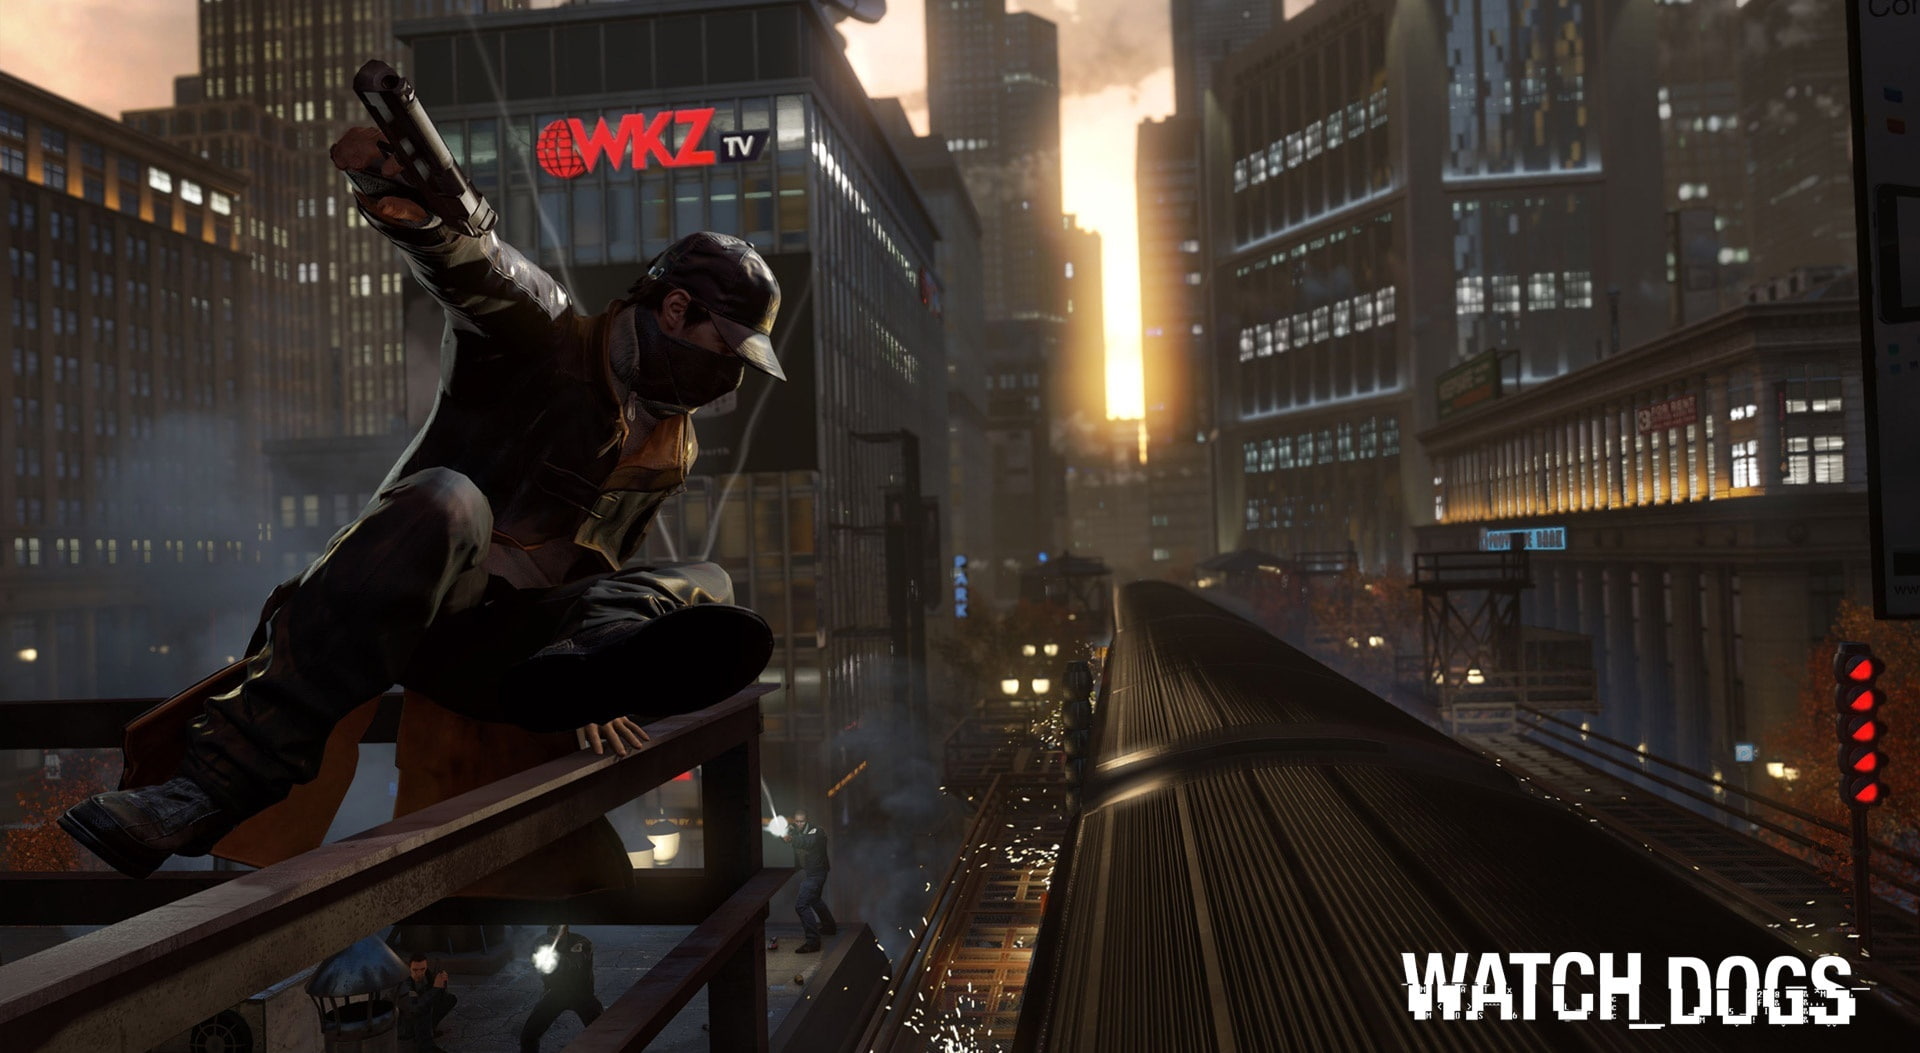 WATCH_DOGS Aiden Pearce, Watch Dogs digital poster, Games, video game